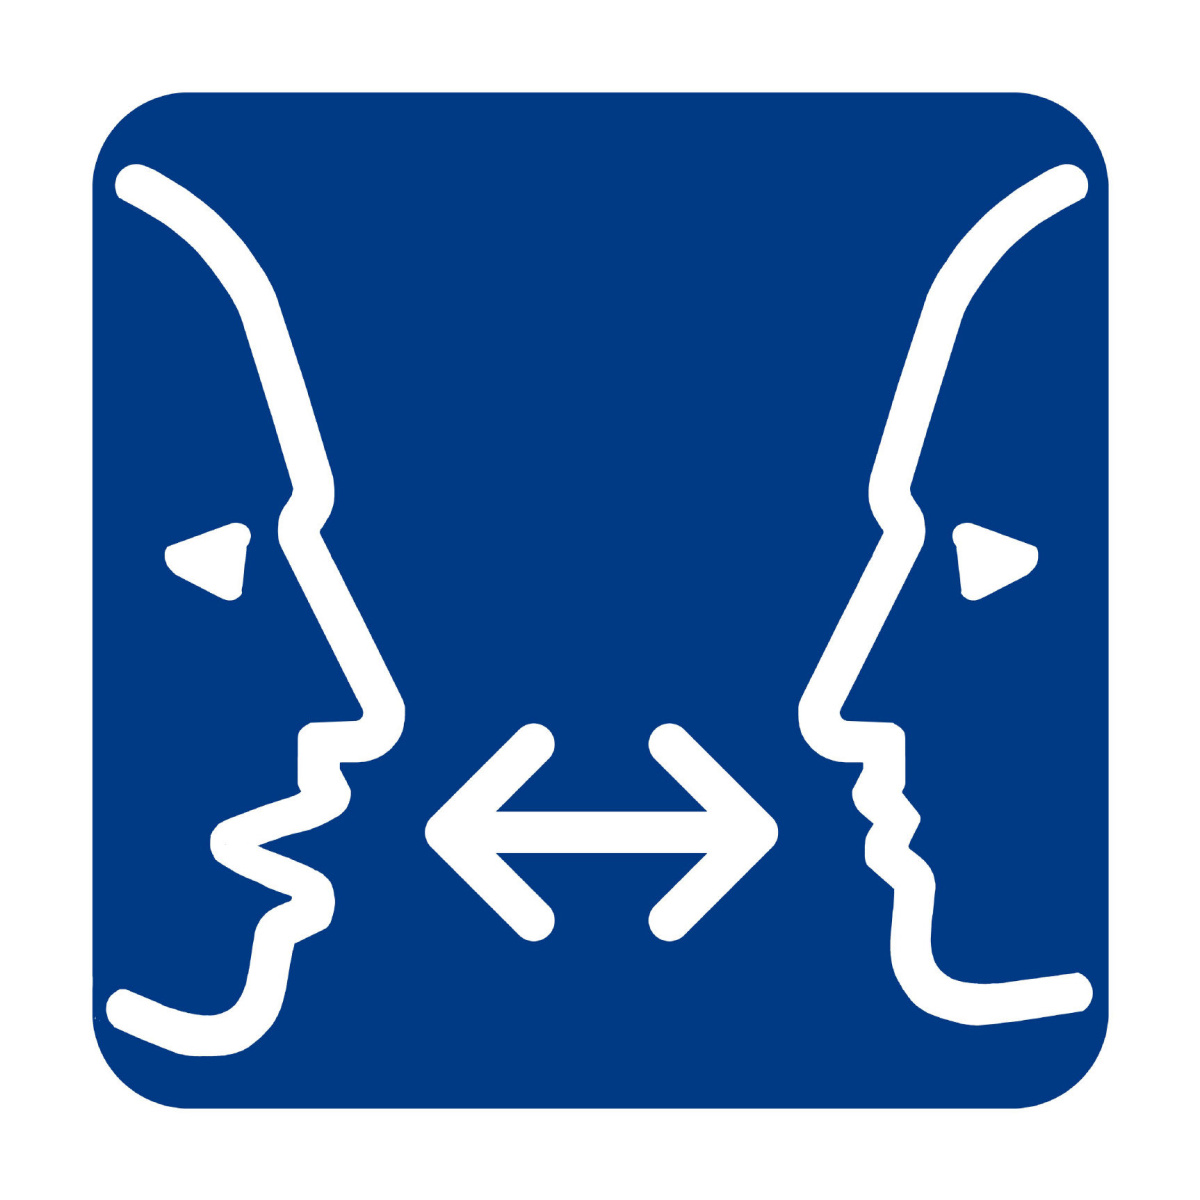 Communication access symbol shows two heads facing each other, one with mouth open, one with mouth closed, and arrows pointing back and forth between them